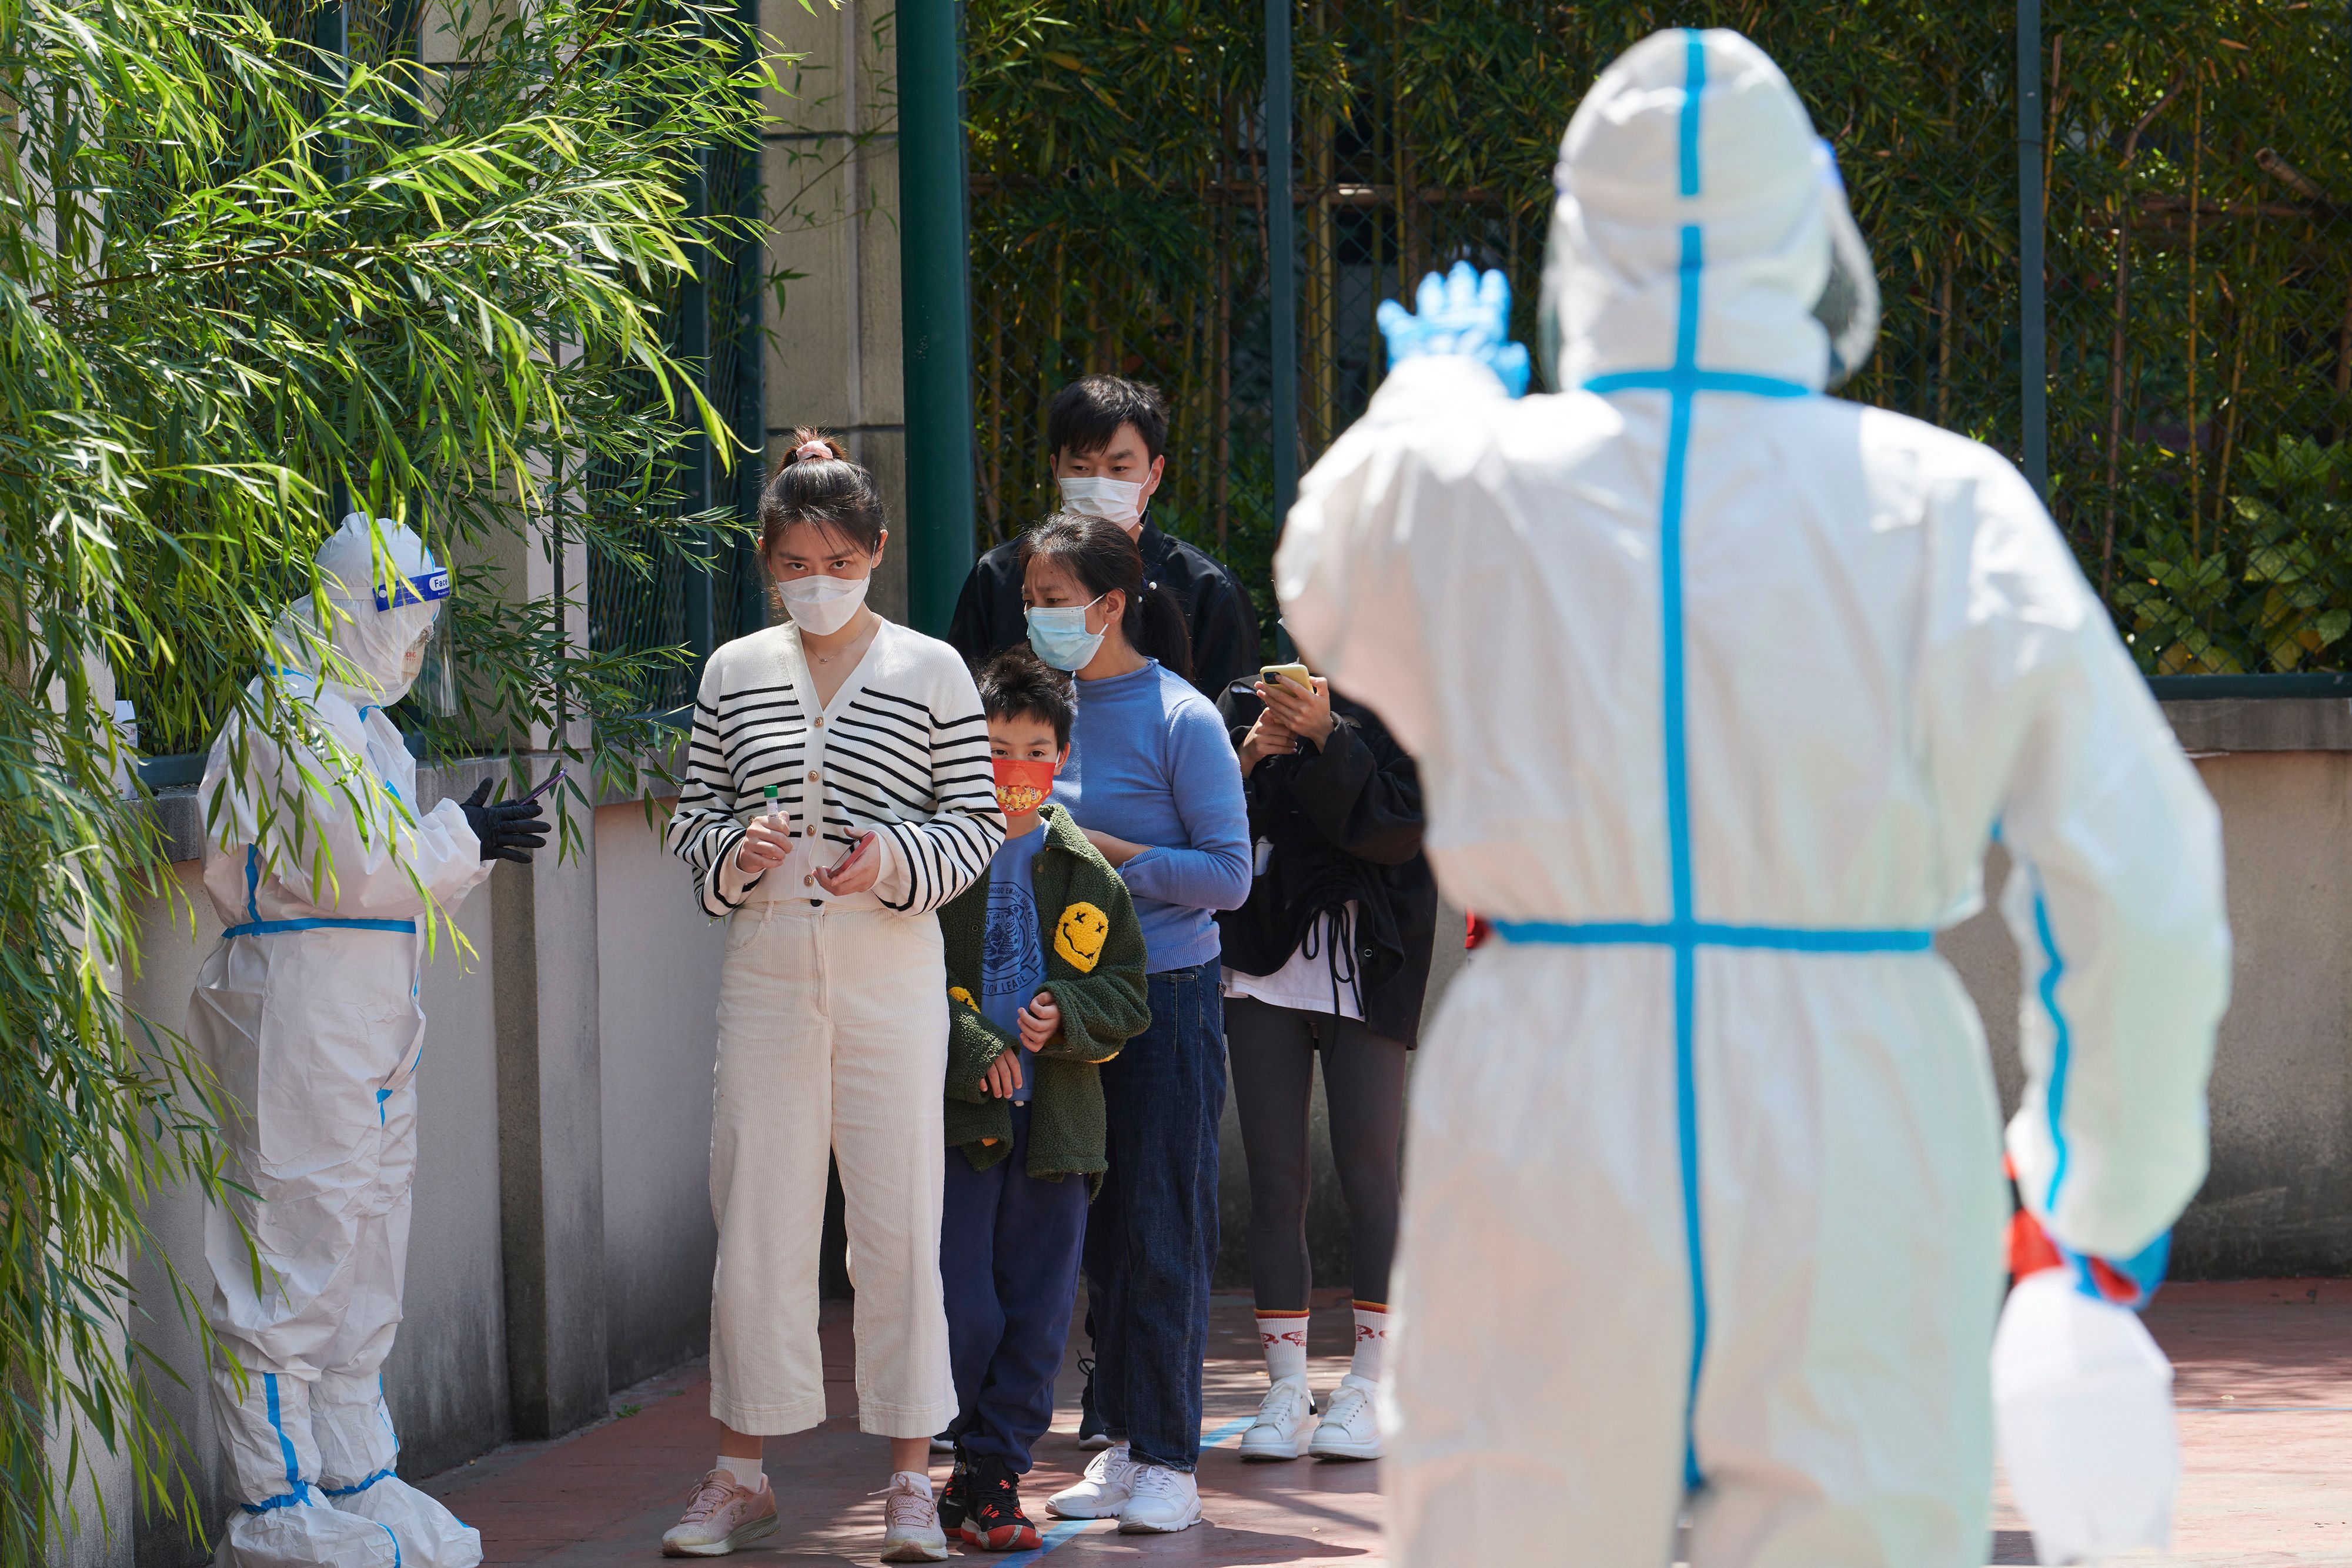 Community volunteers wearing personal protective equipment guide residents queuing to get tested for Covid during lockdown in Pudong district in Shanghai on April 17, 2022